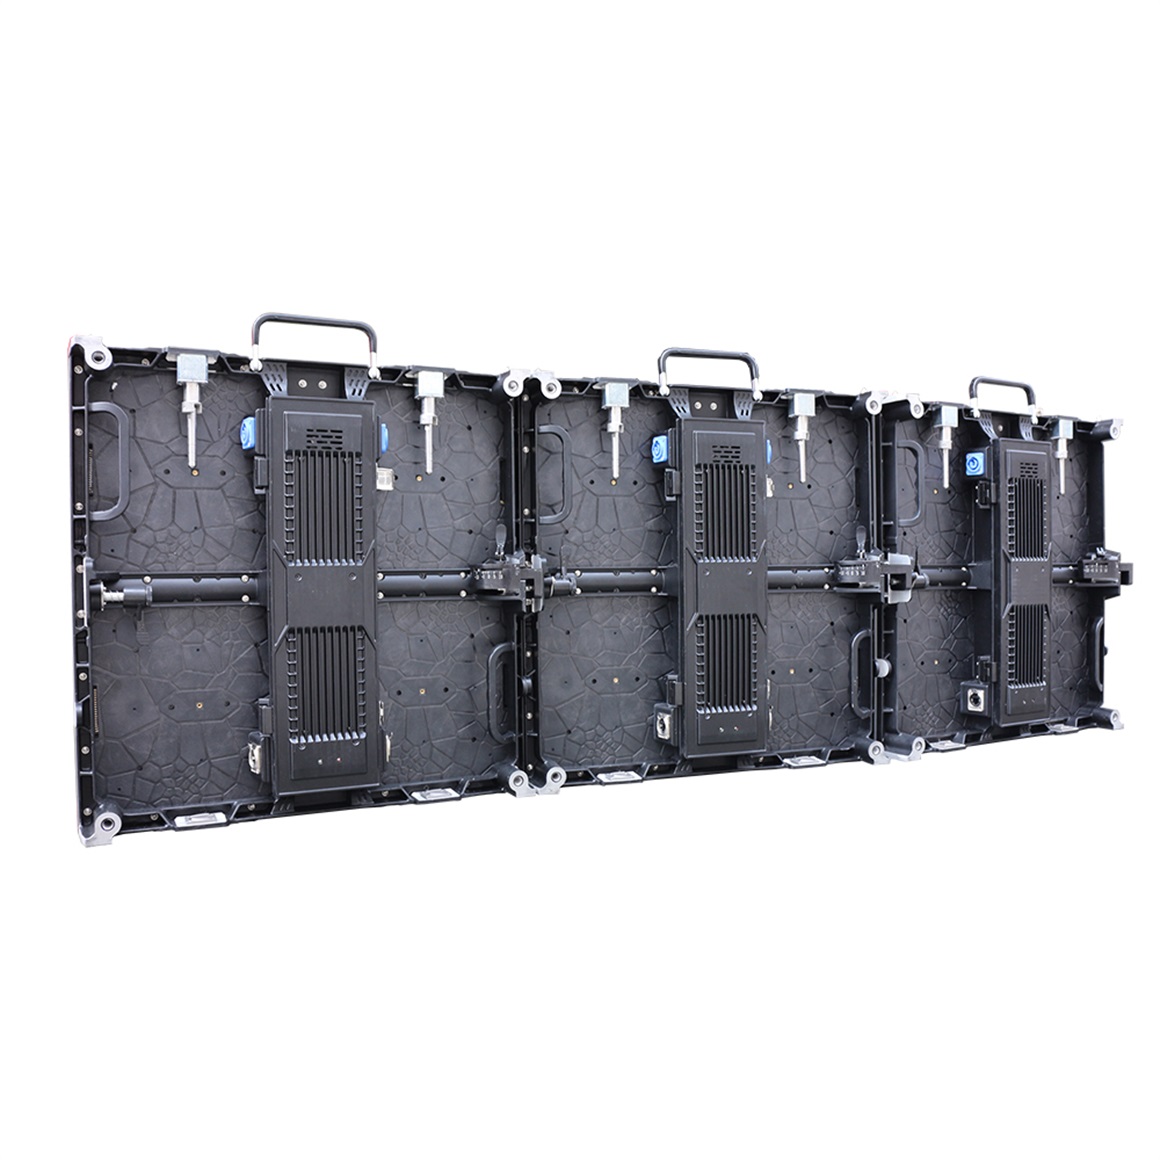 P2.97 Arc Style Indoor Curvable Led Video Screen for Stage Events ( 500x500mm )